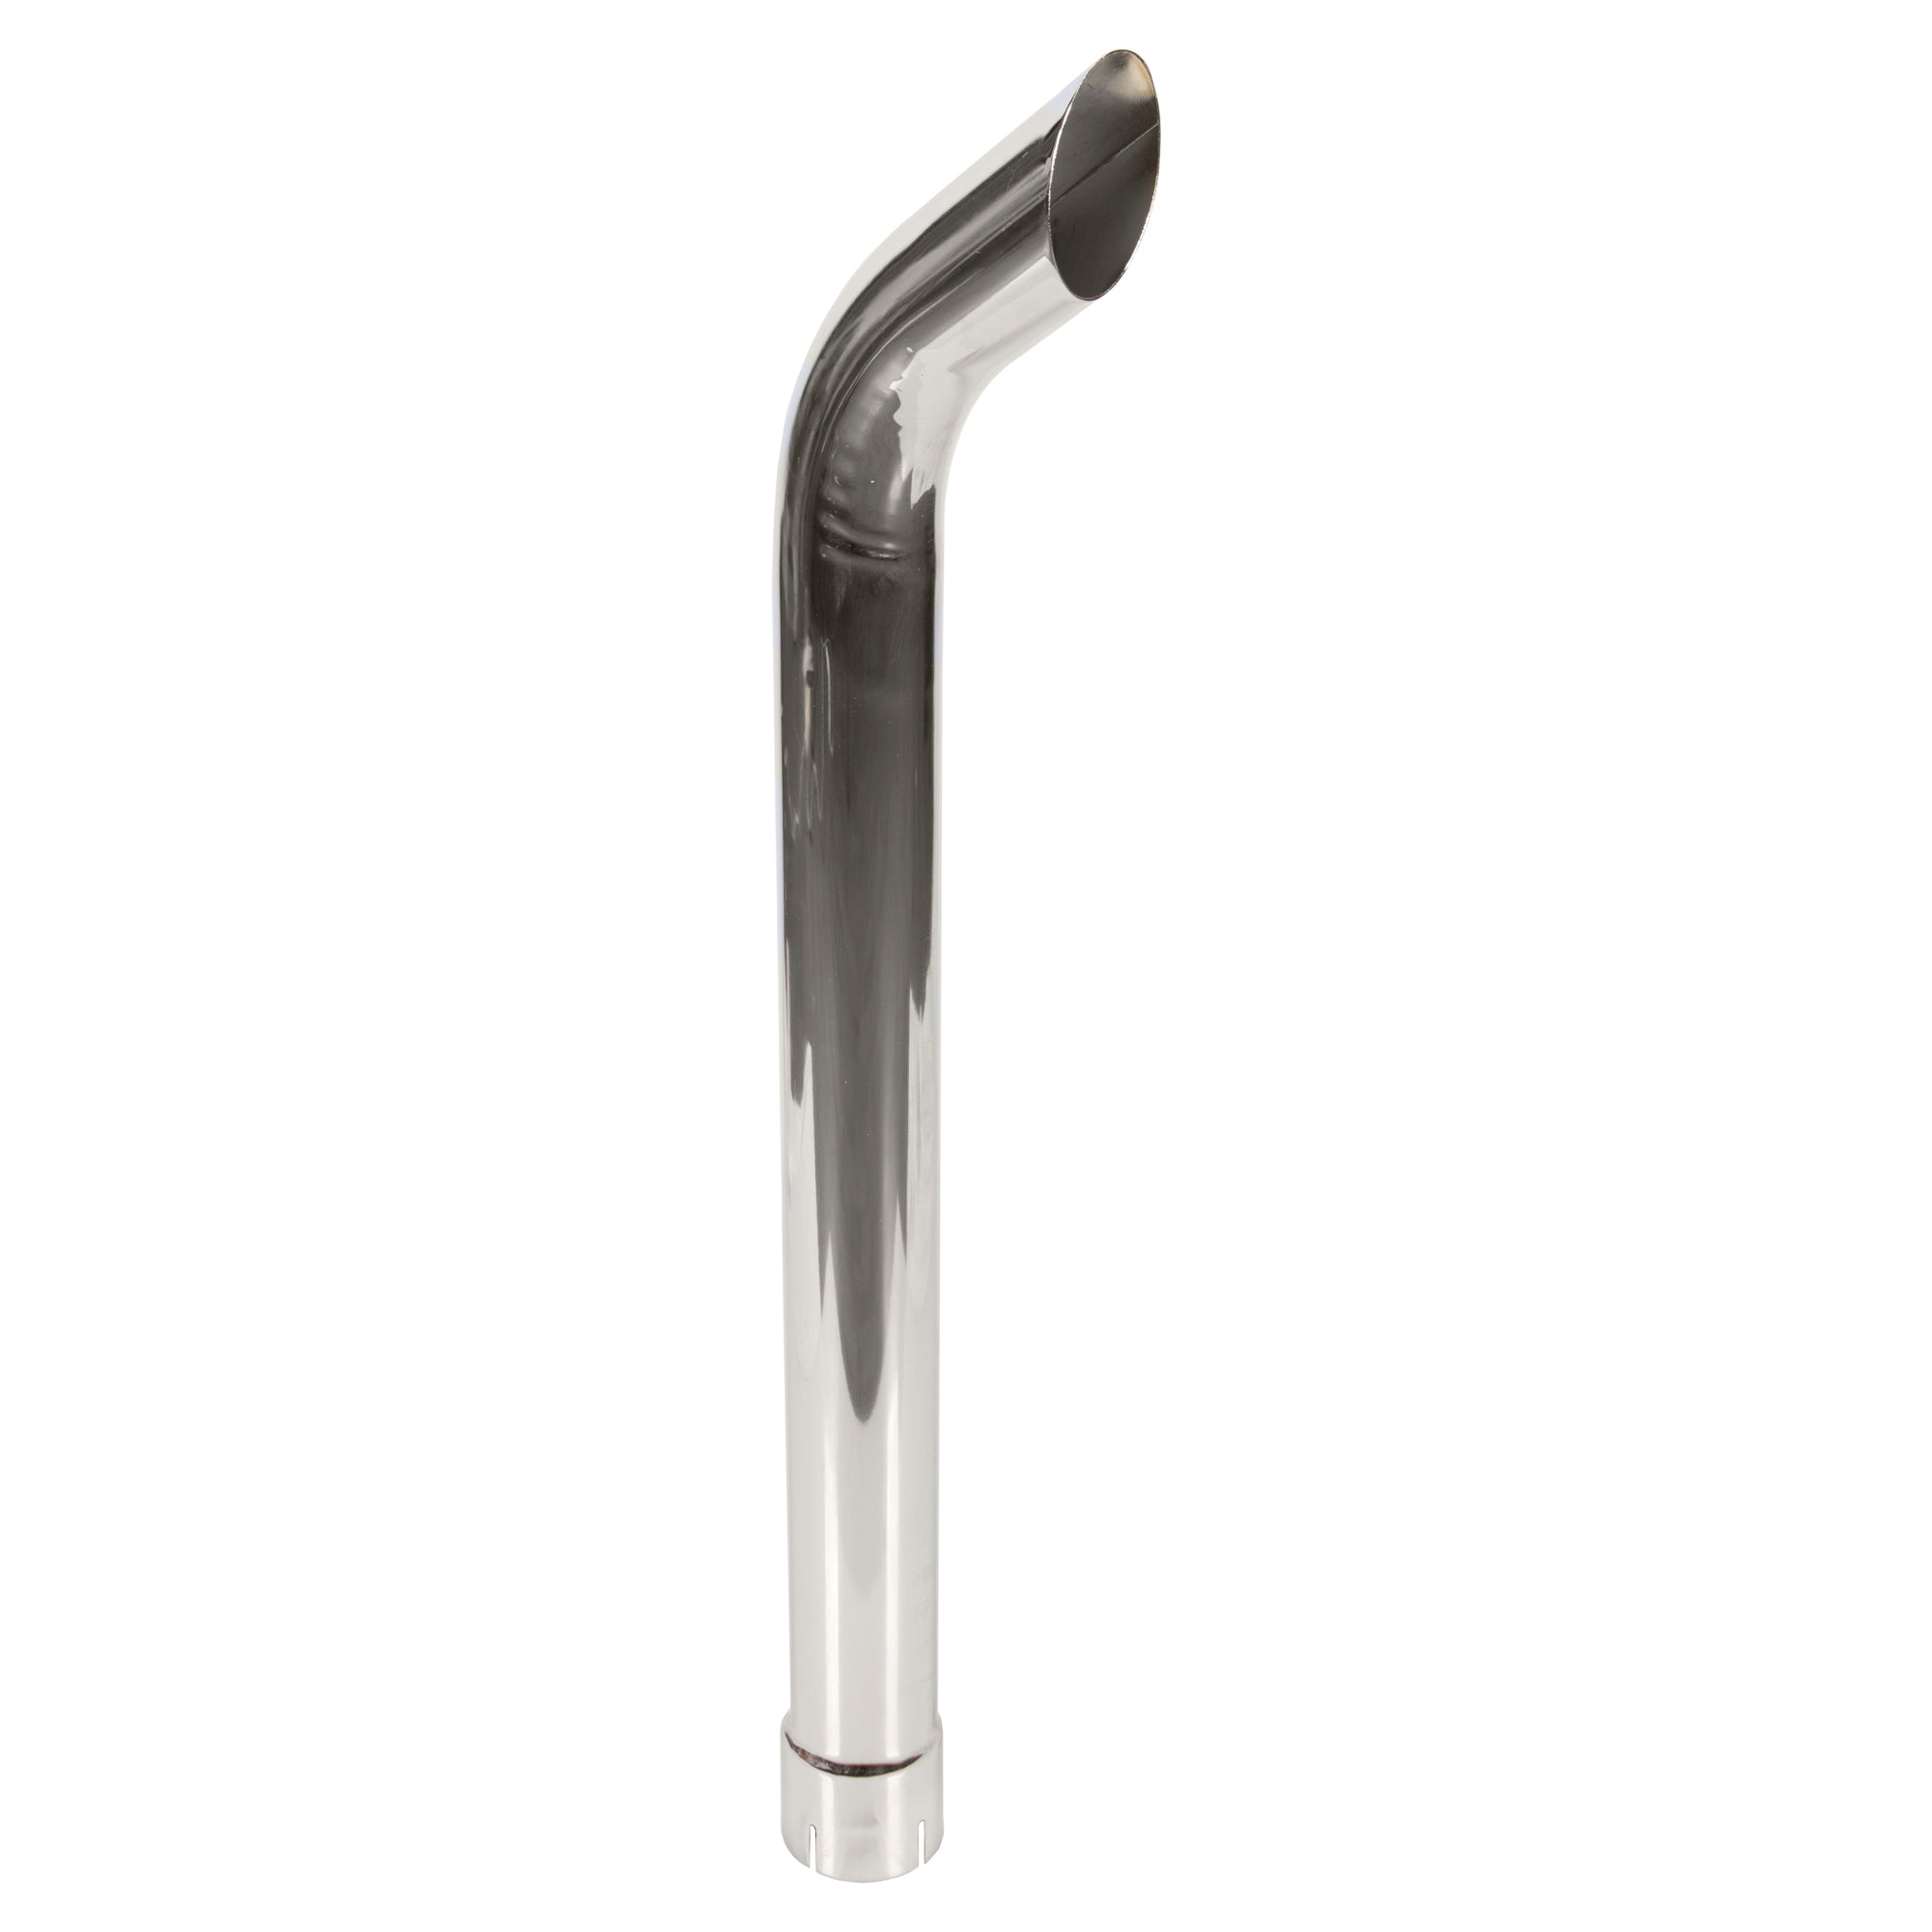 A189049 Exhaust Stack Pipe Replacement for CASE-IH 5250 5140 5220 5230 5130 Chrome